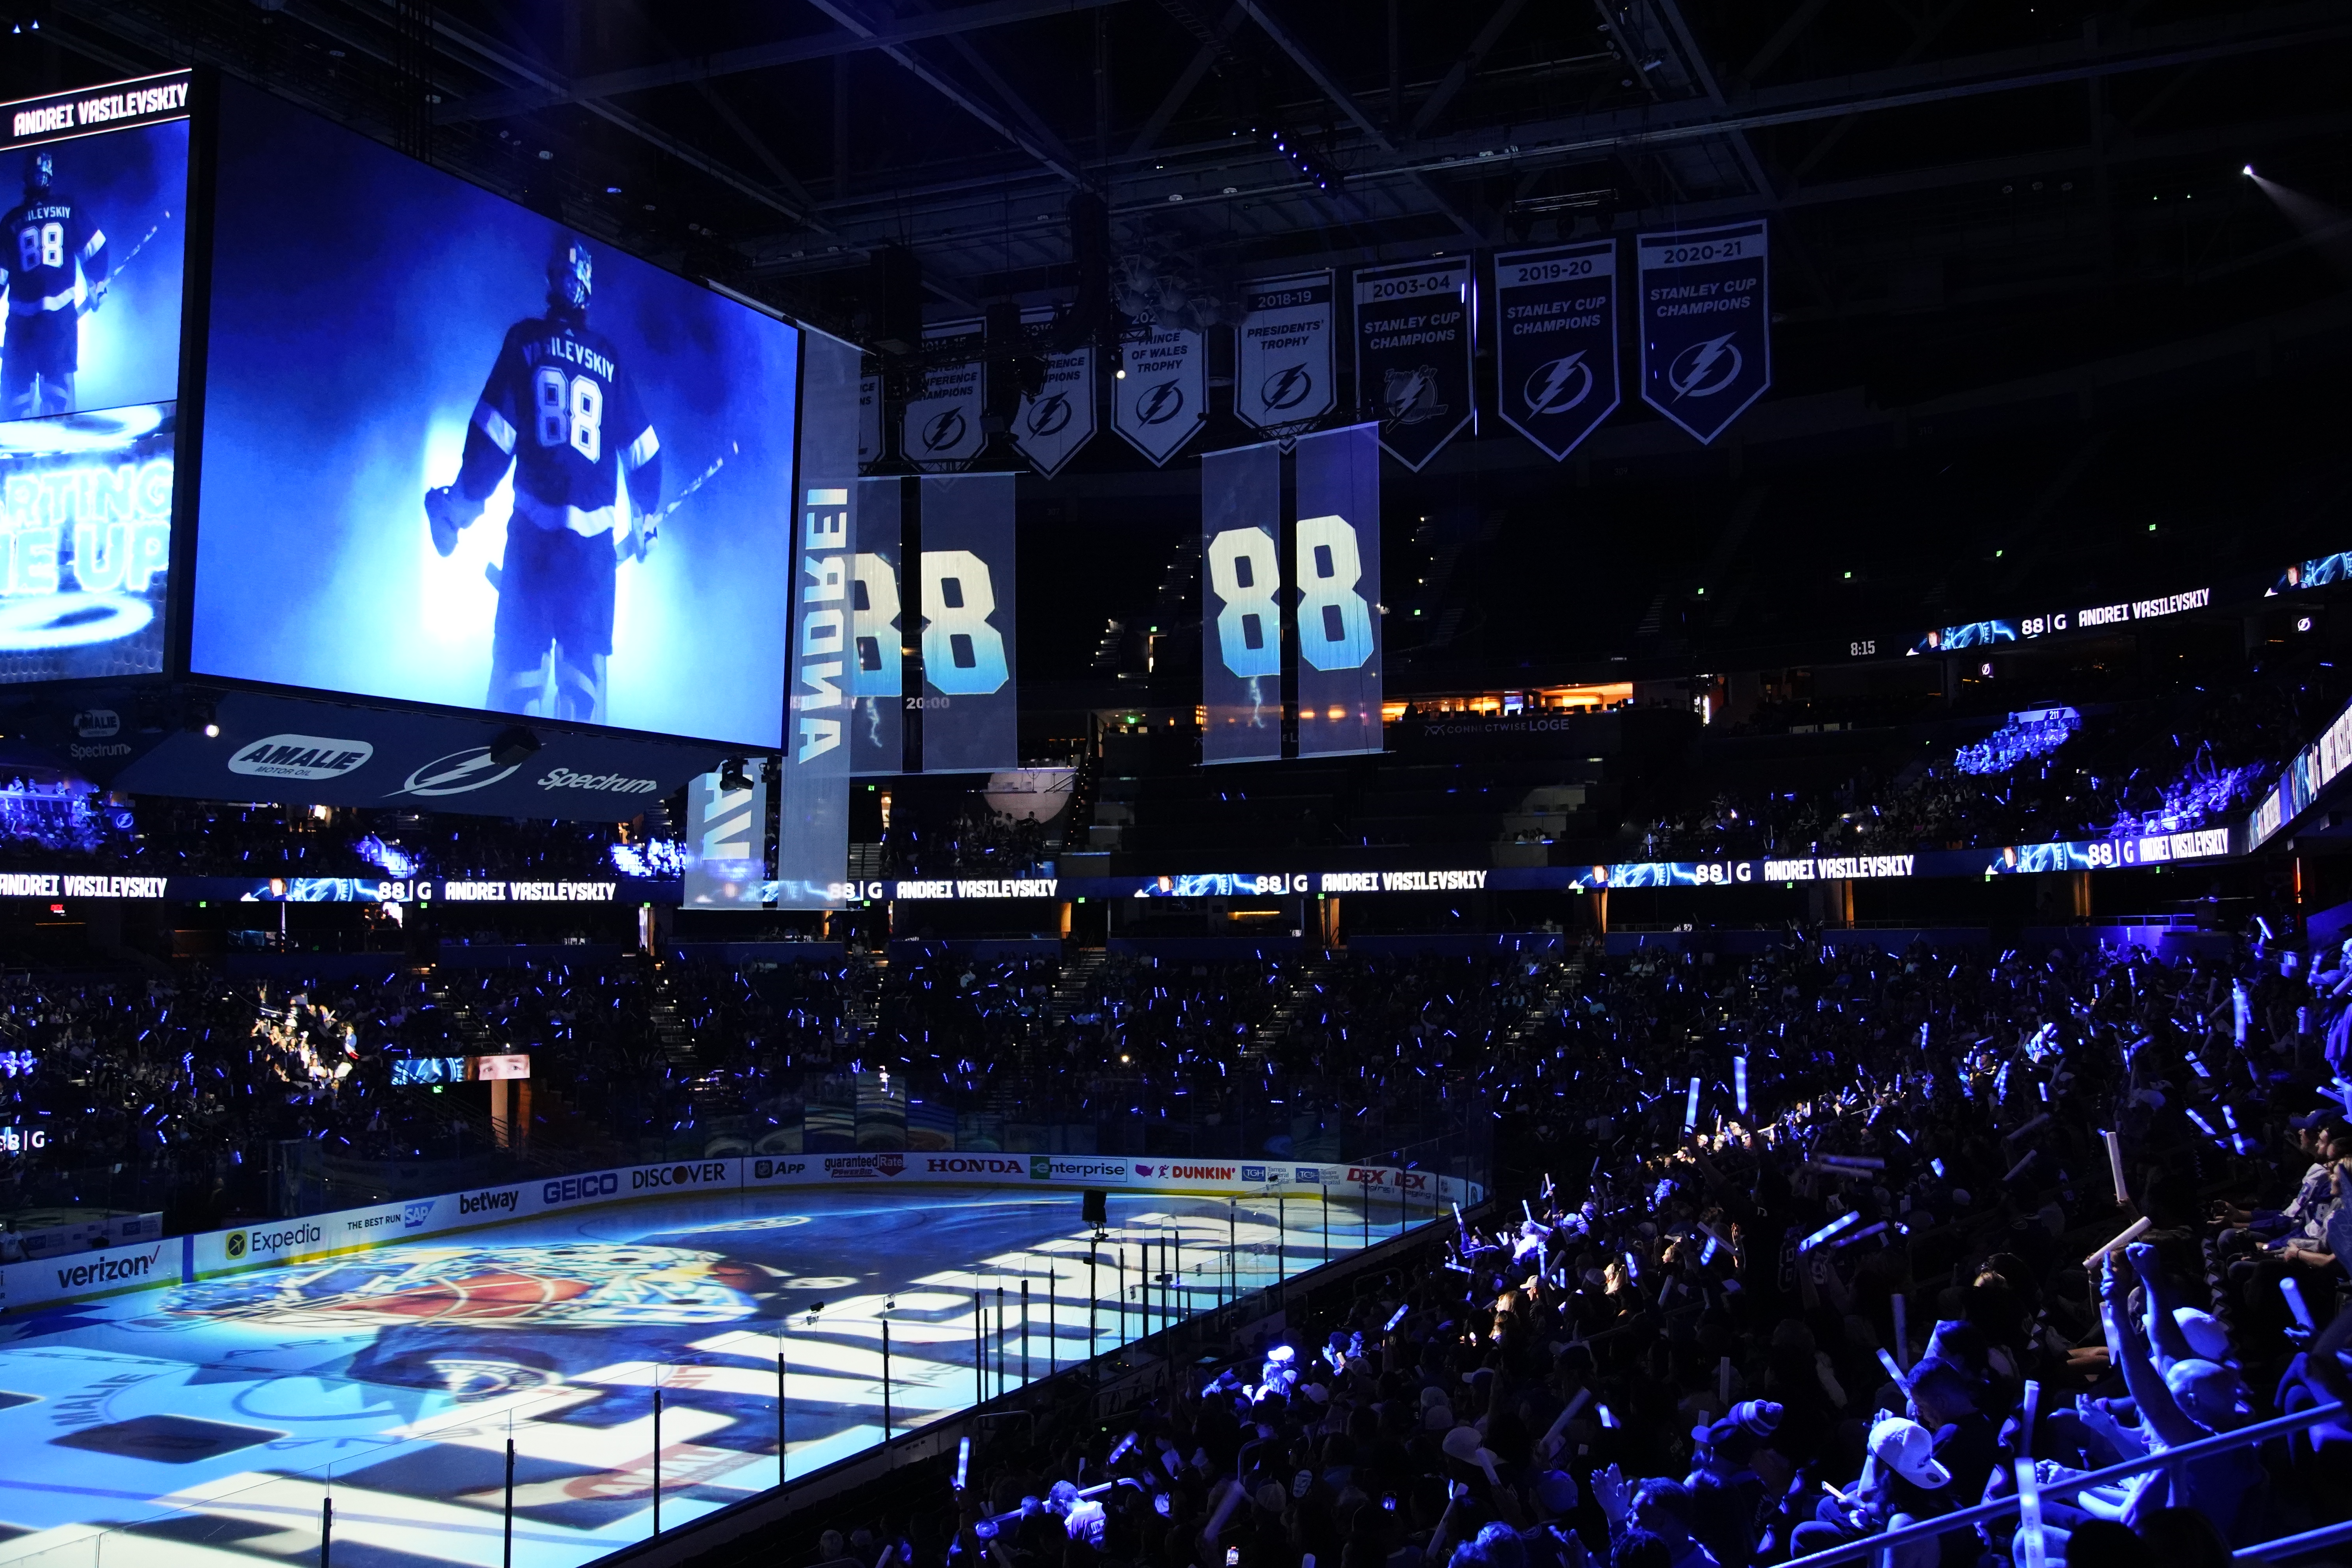 Thousands cheer on the Tampa Bay Lightning during watch party at